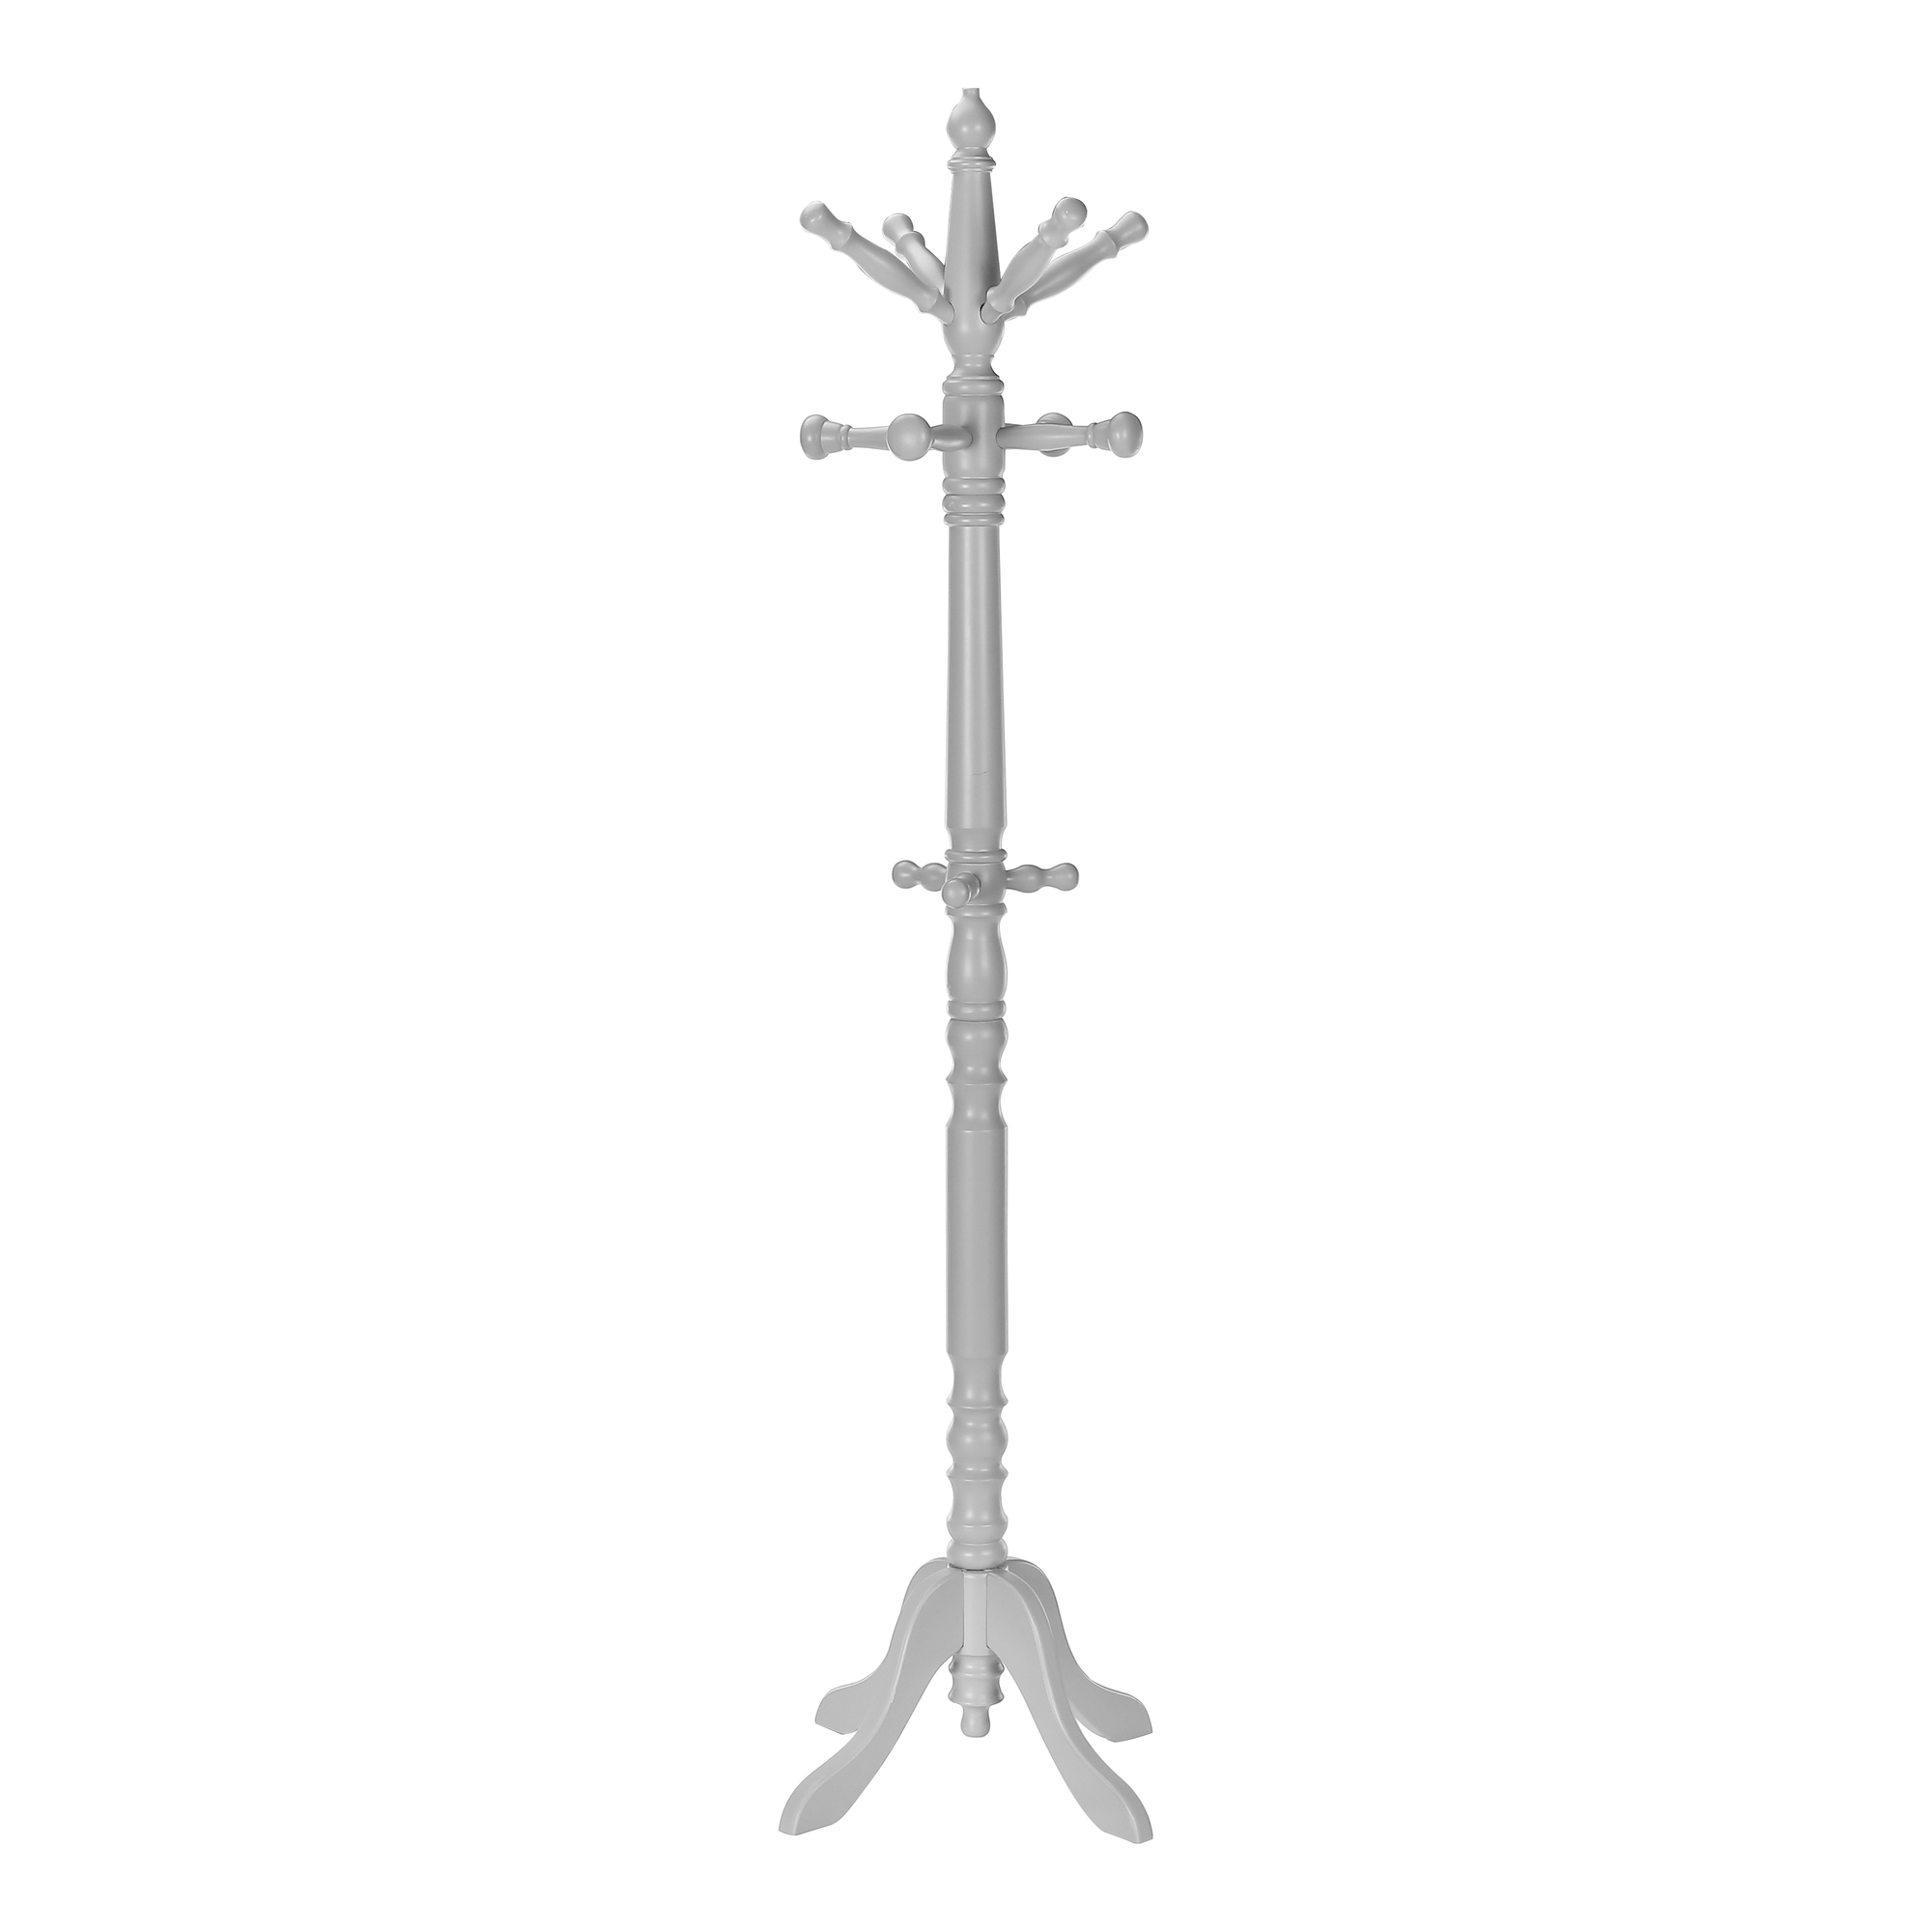 COAT RACK - 73"H / GREY WOOD TRADITIONAL STYLE